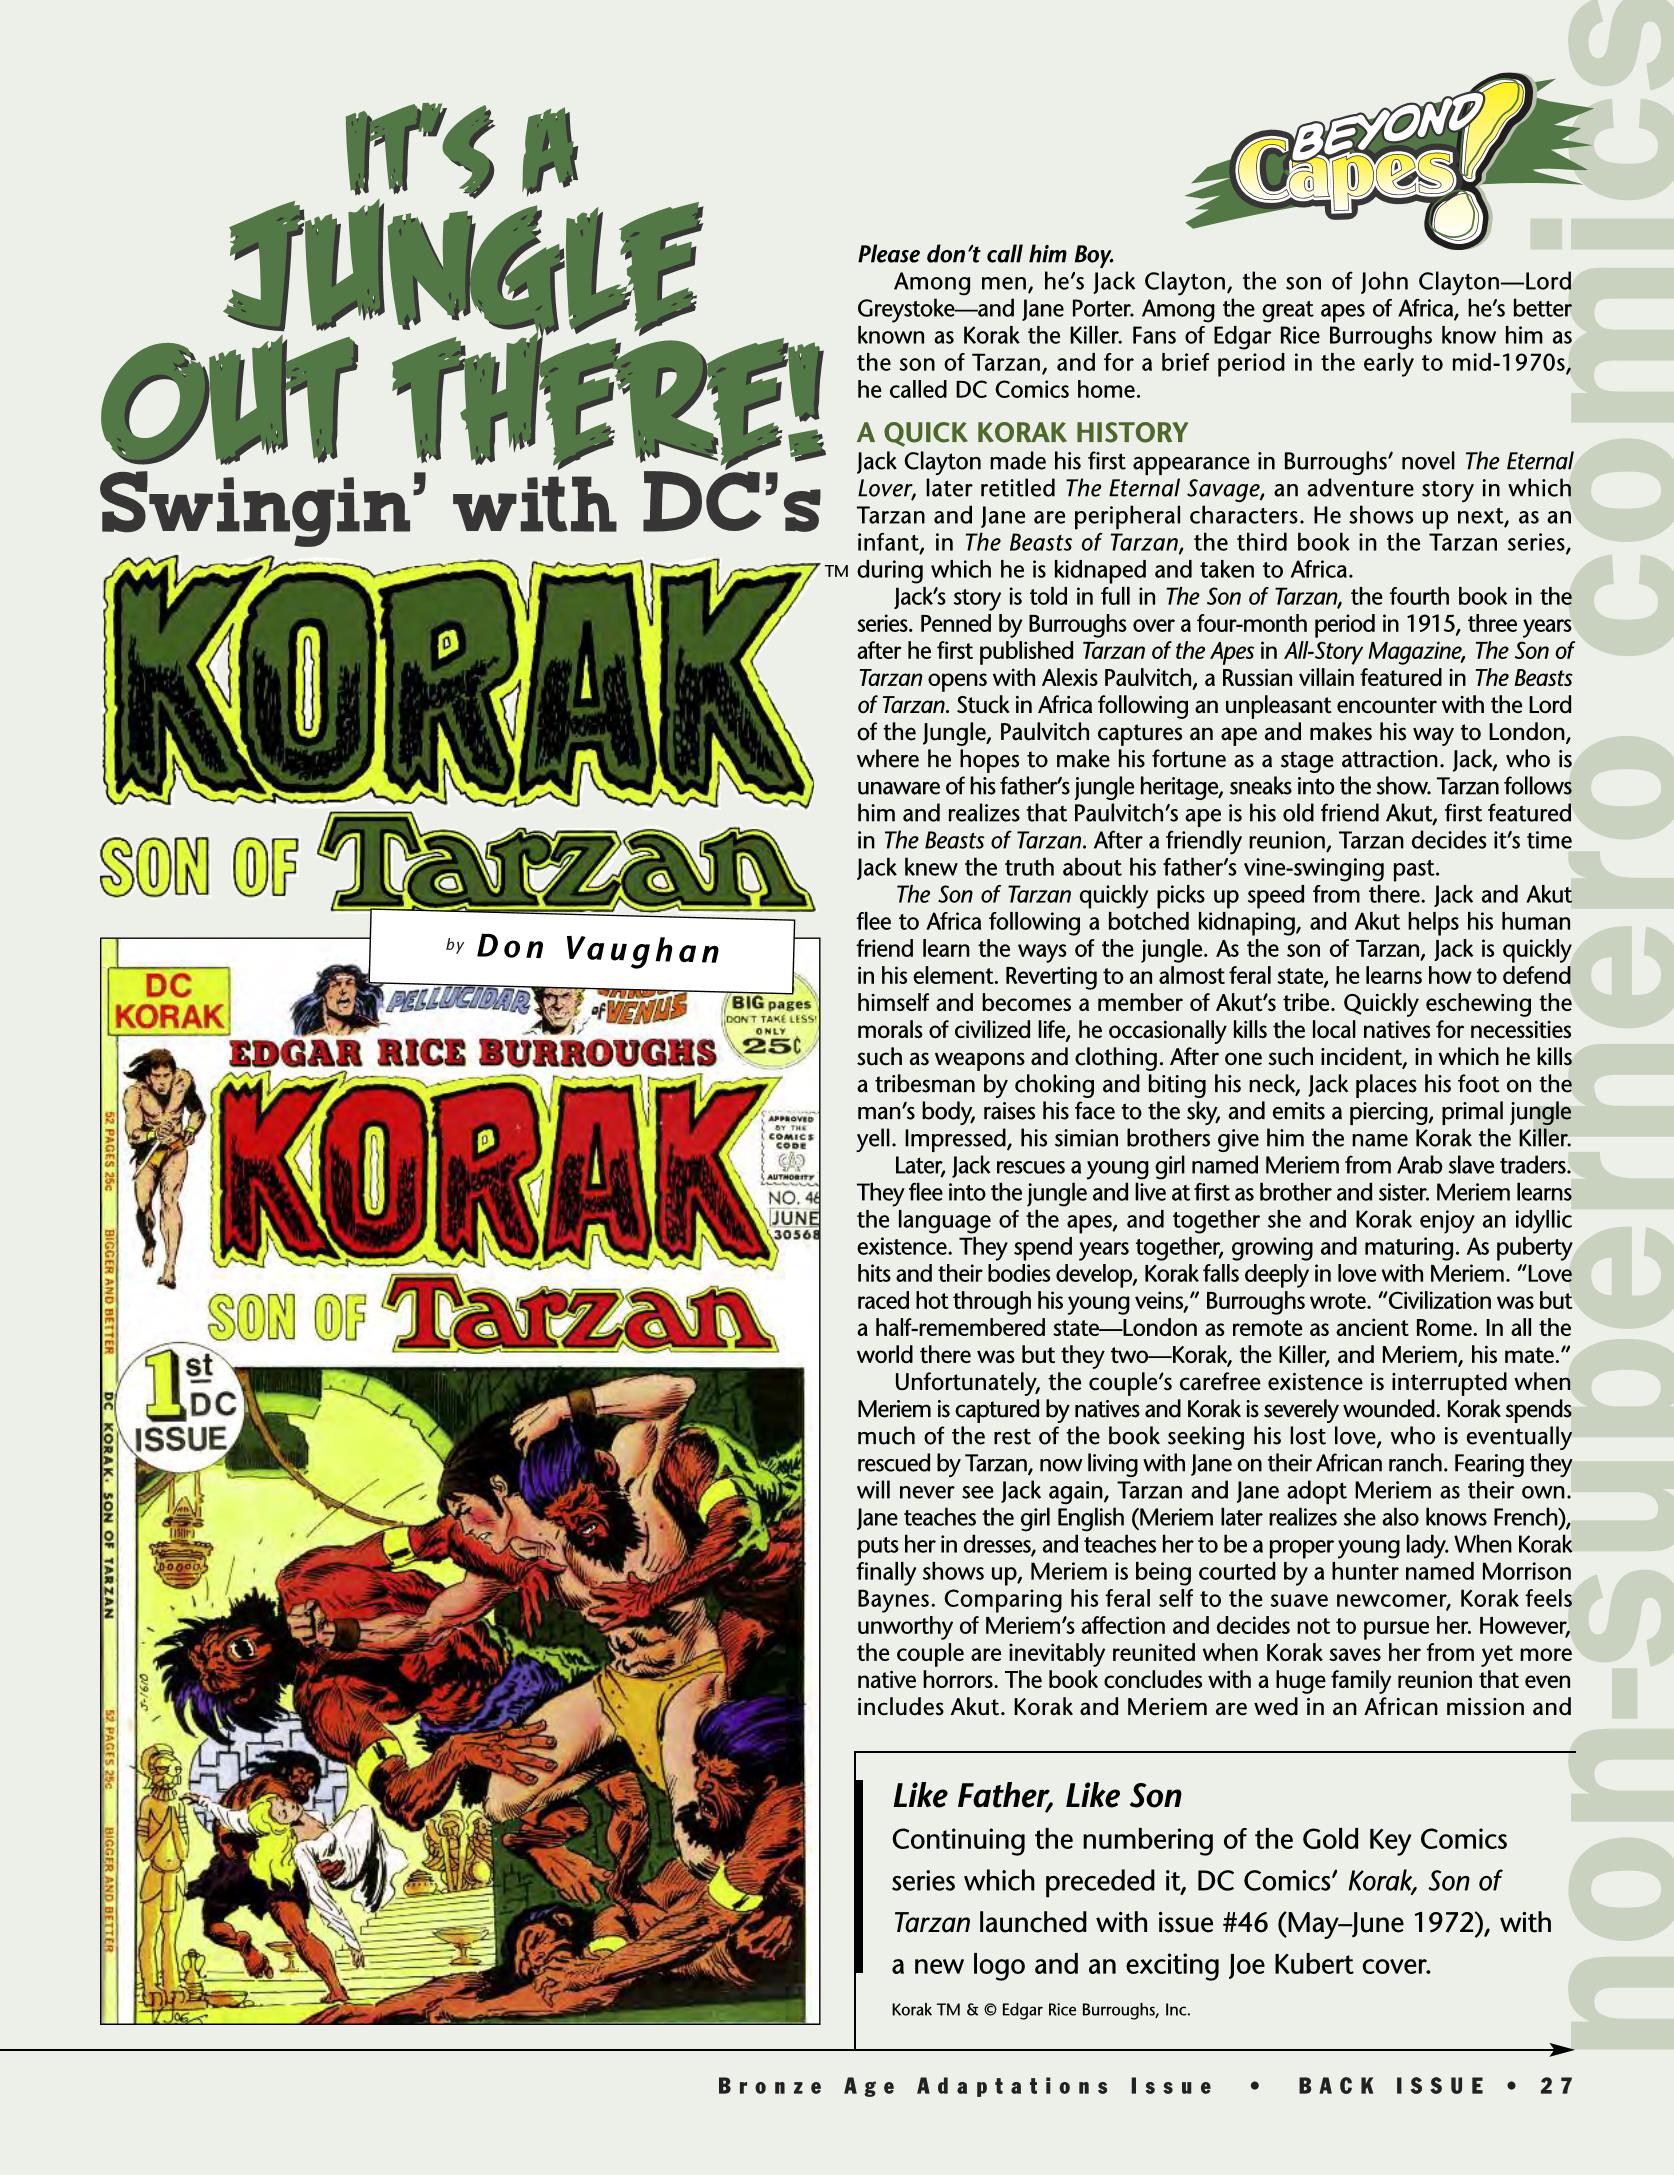 Read online Back Issue comic -  Issue #89 - 22